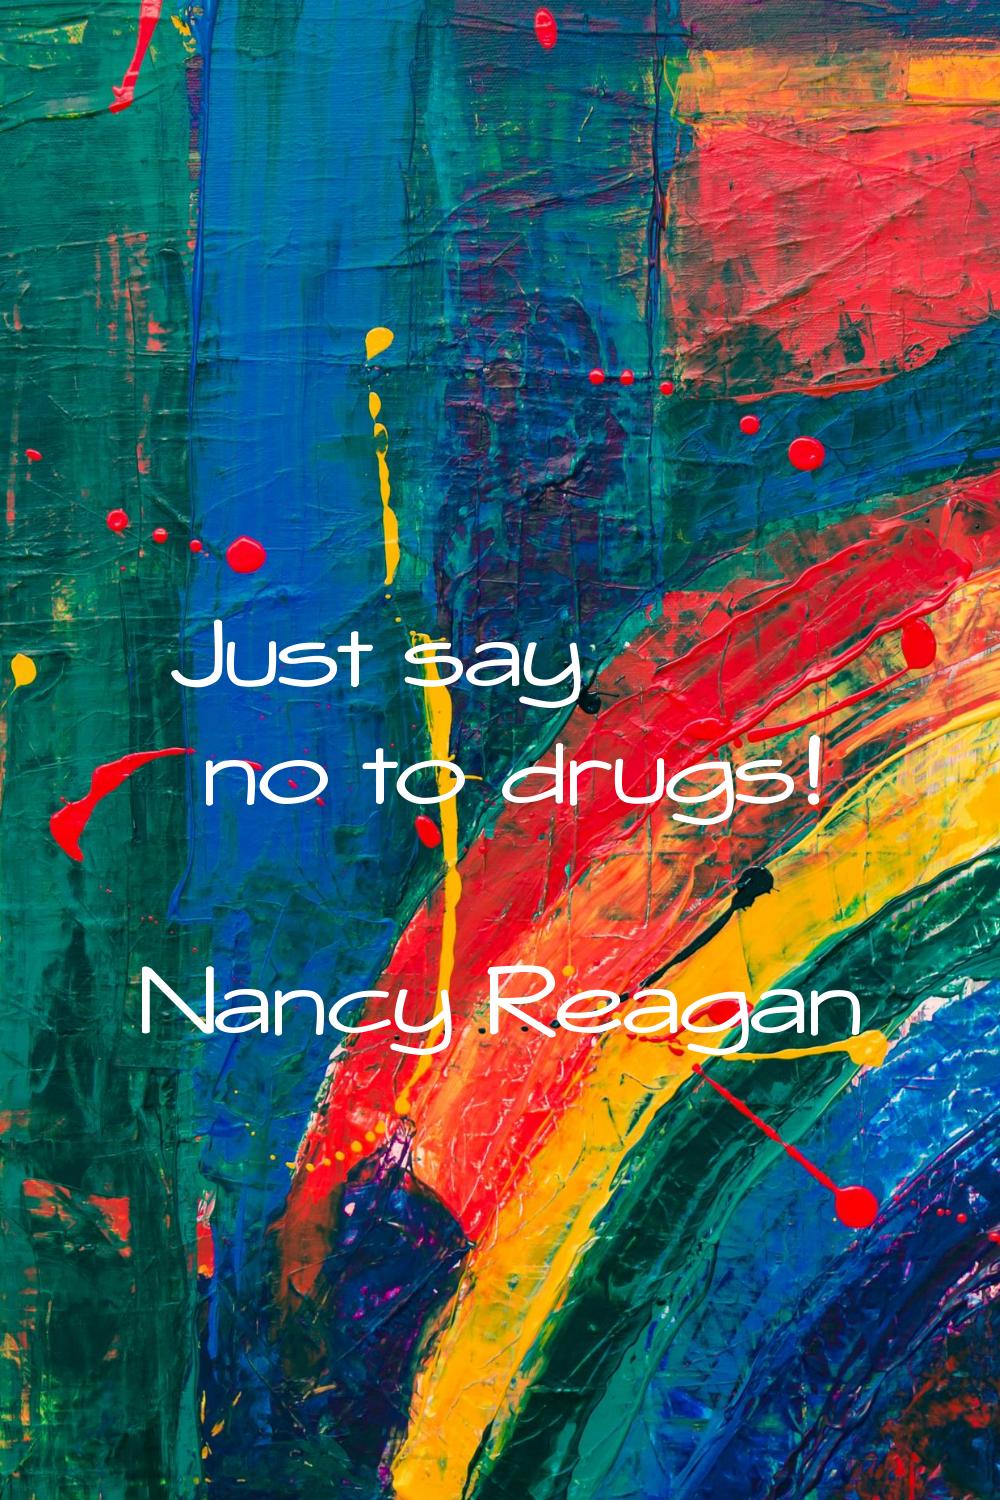 Just say no to drugs!